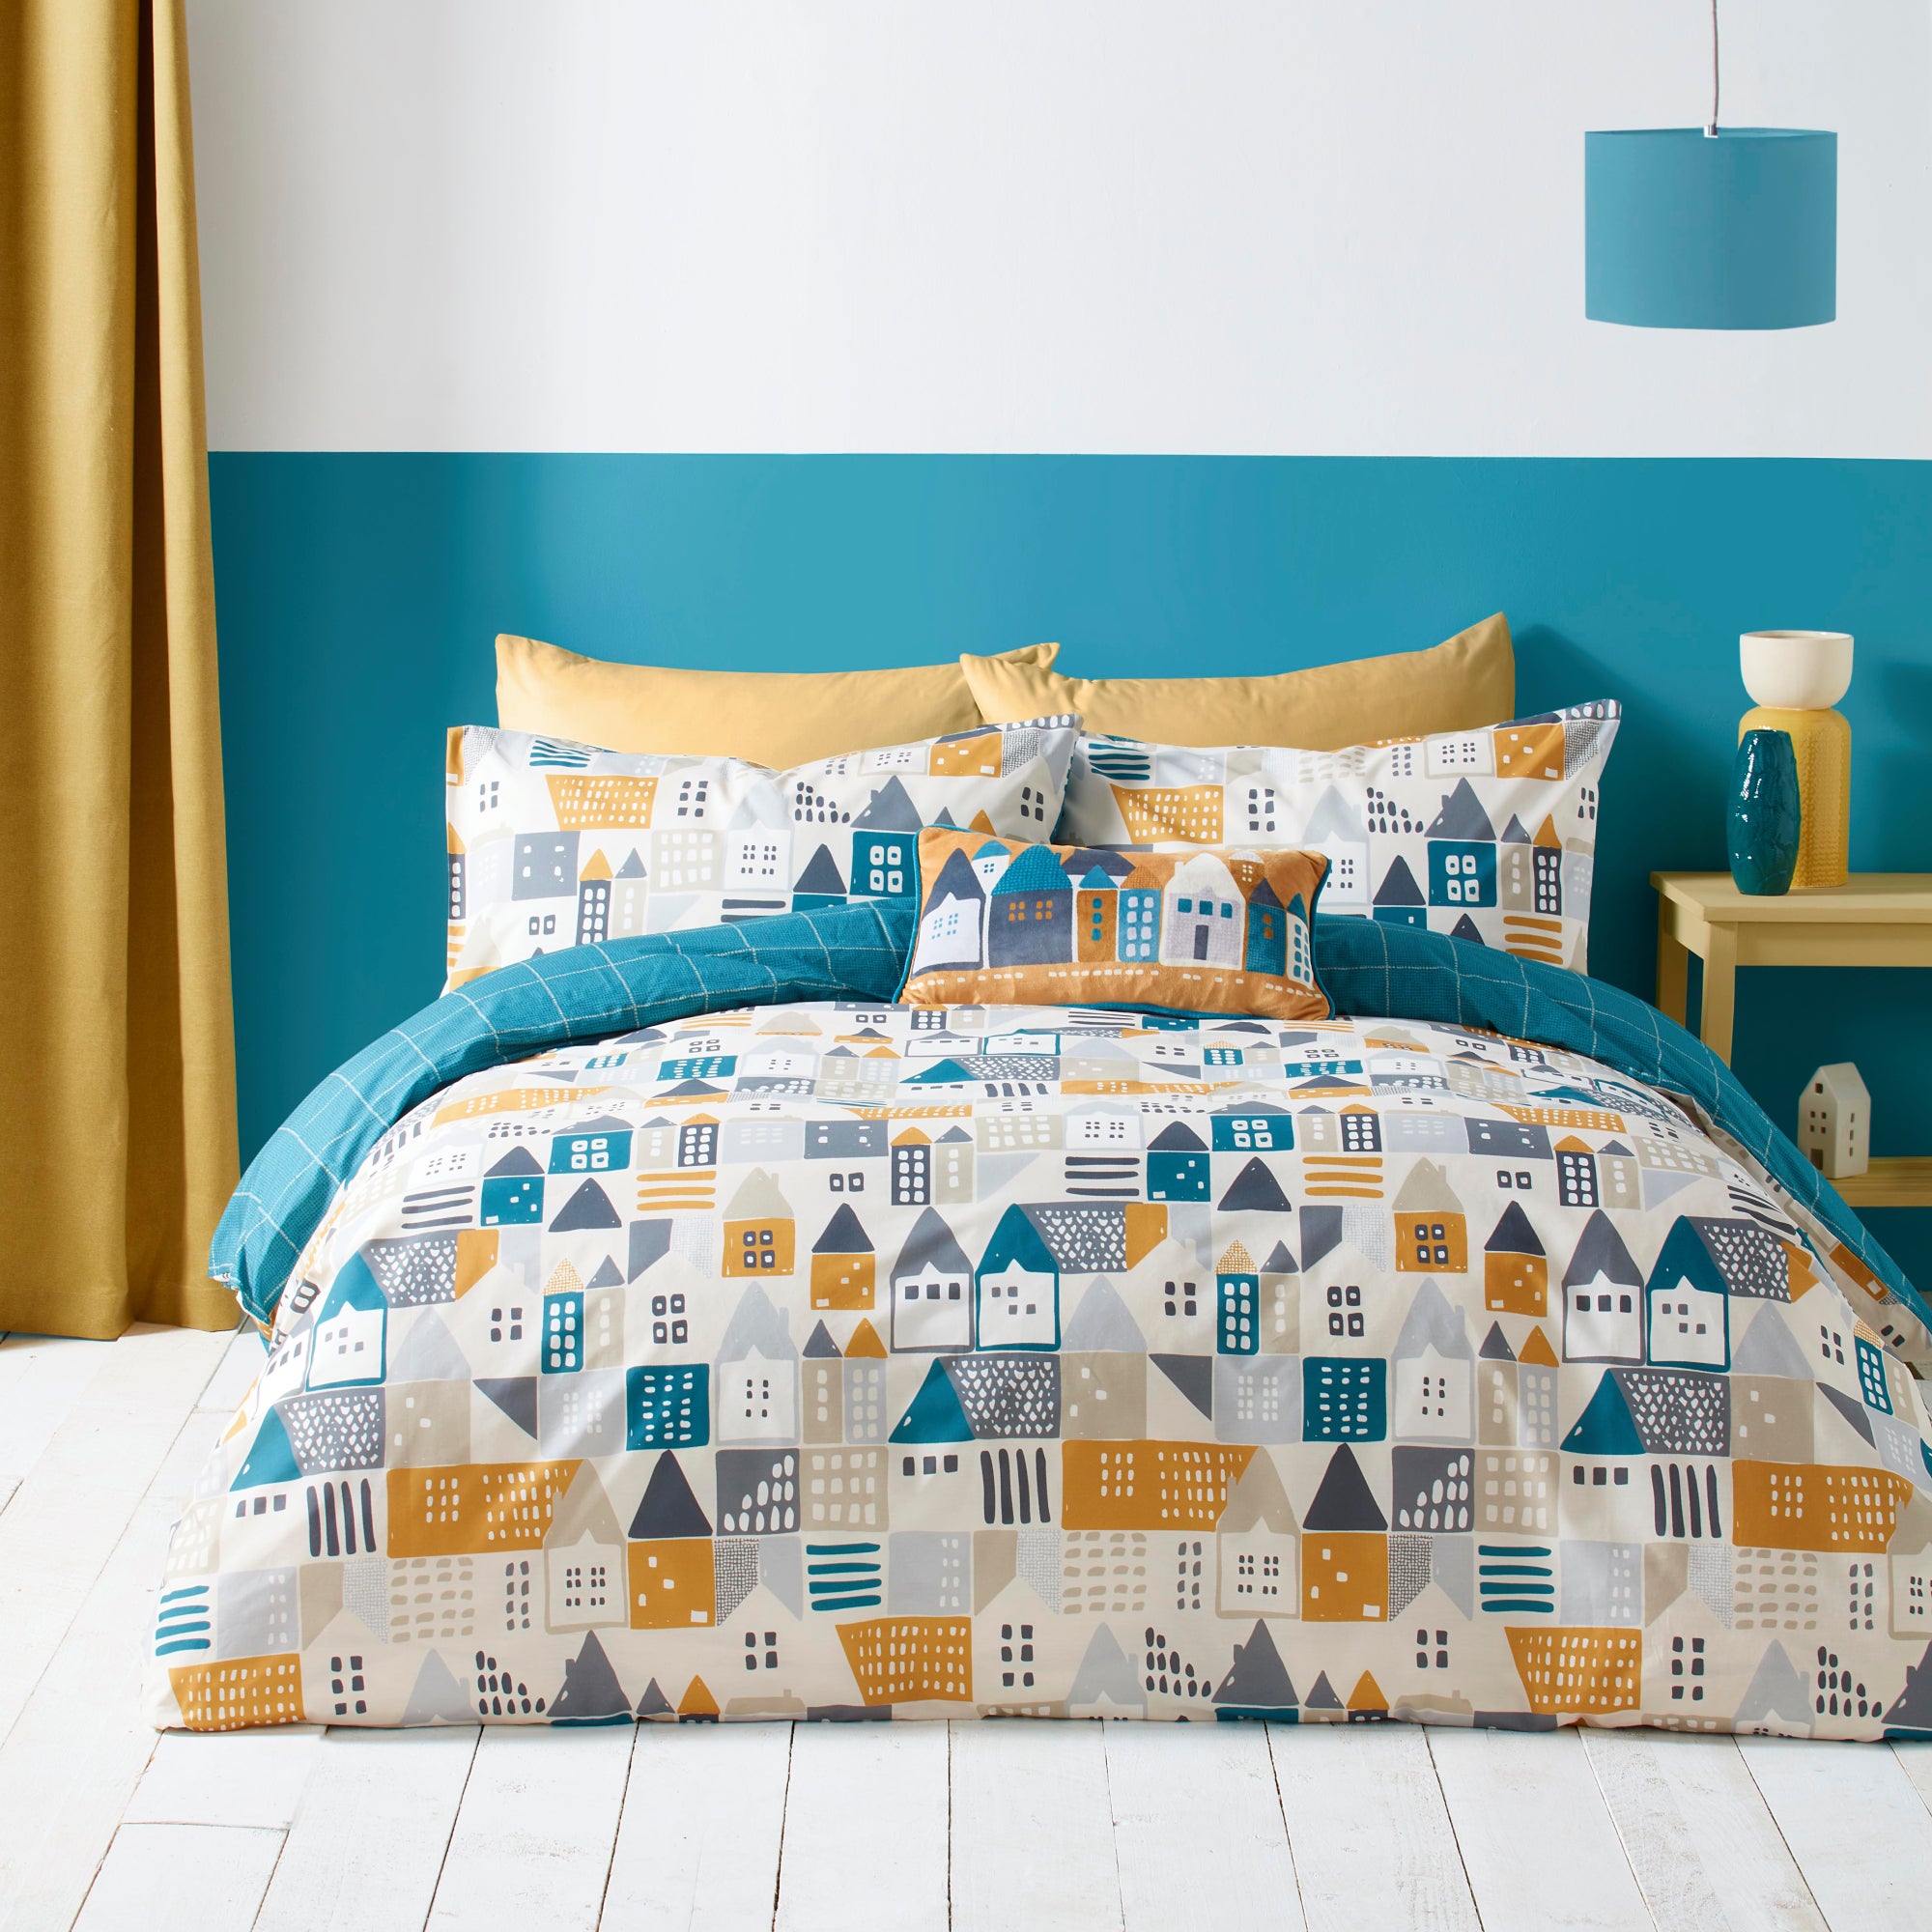 Nordica Teal Duvet Cover And Pillowcase Set Teal Green